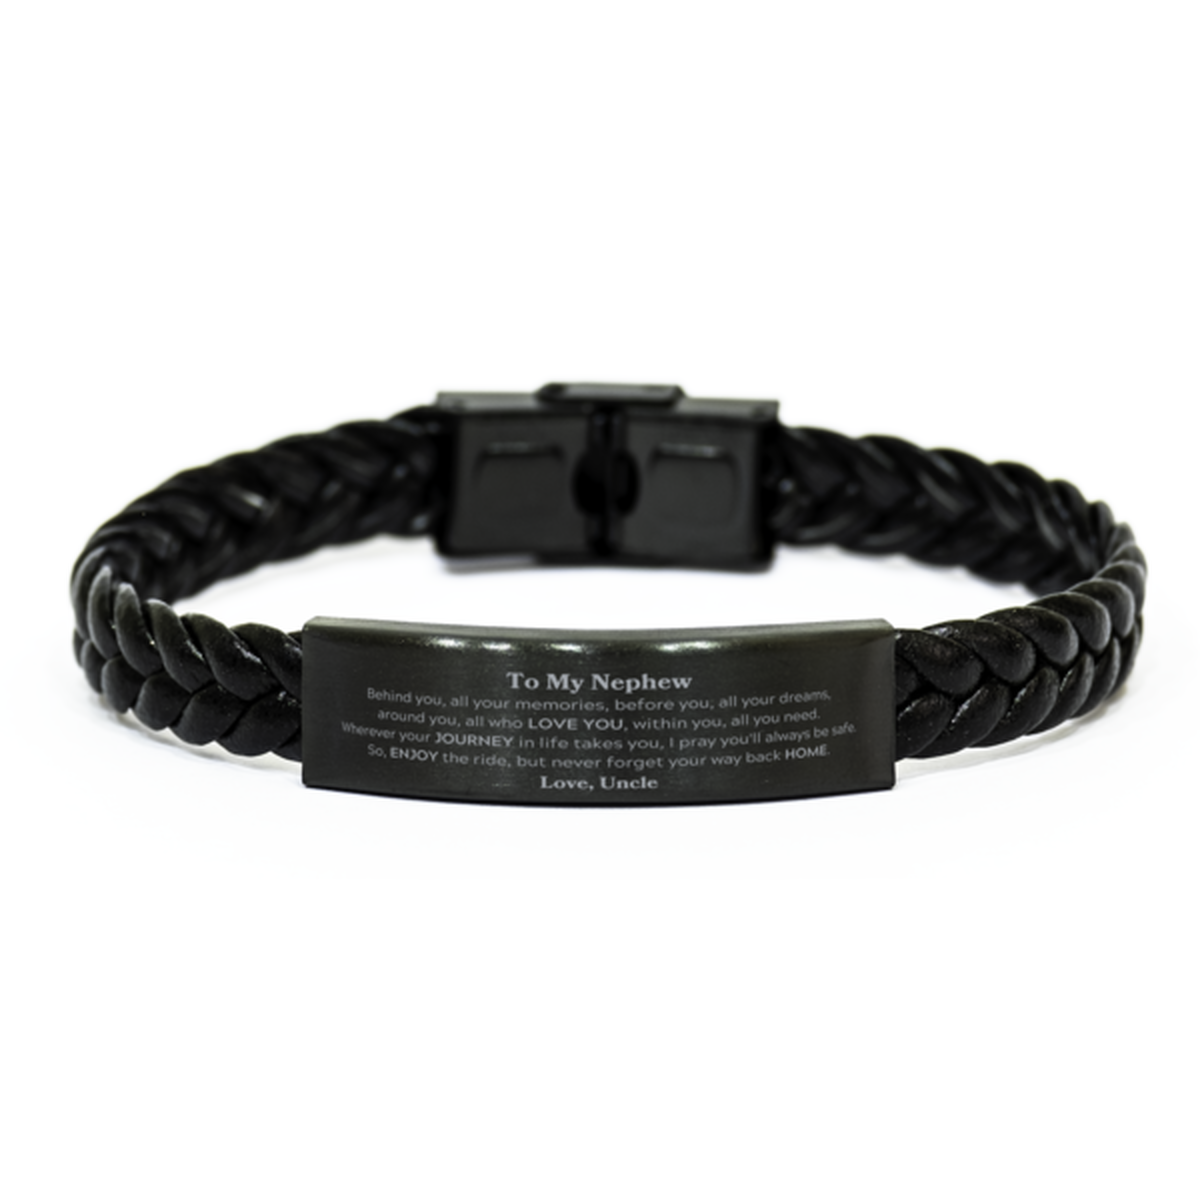 To My Nephew Graduation Gifts from Uncle, Nephew Braided Leather Bracelet Christmas Birthday Gifts for Nephew Behind you, all your memories, before you, all your dreams. Love, Uncle